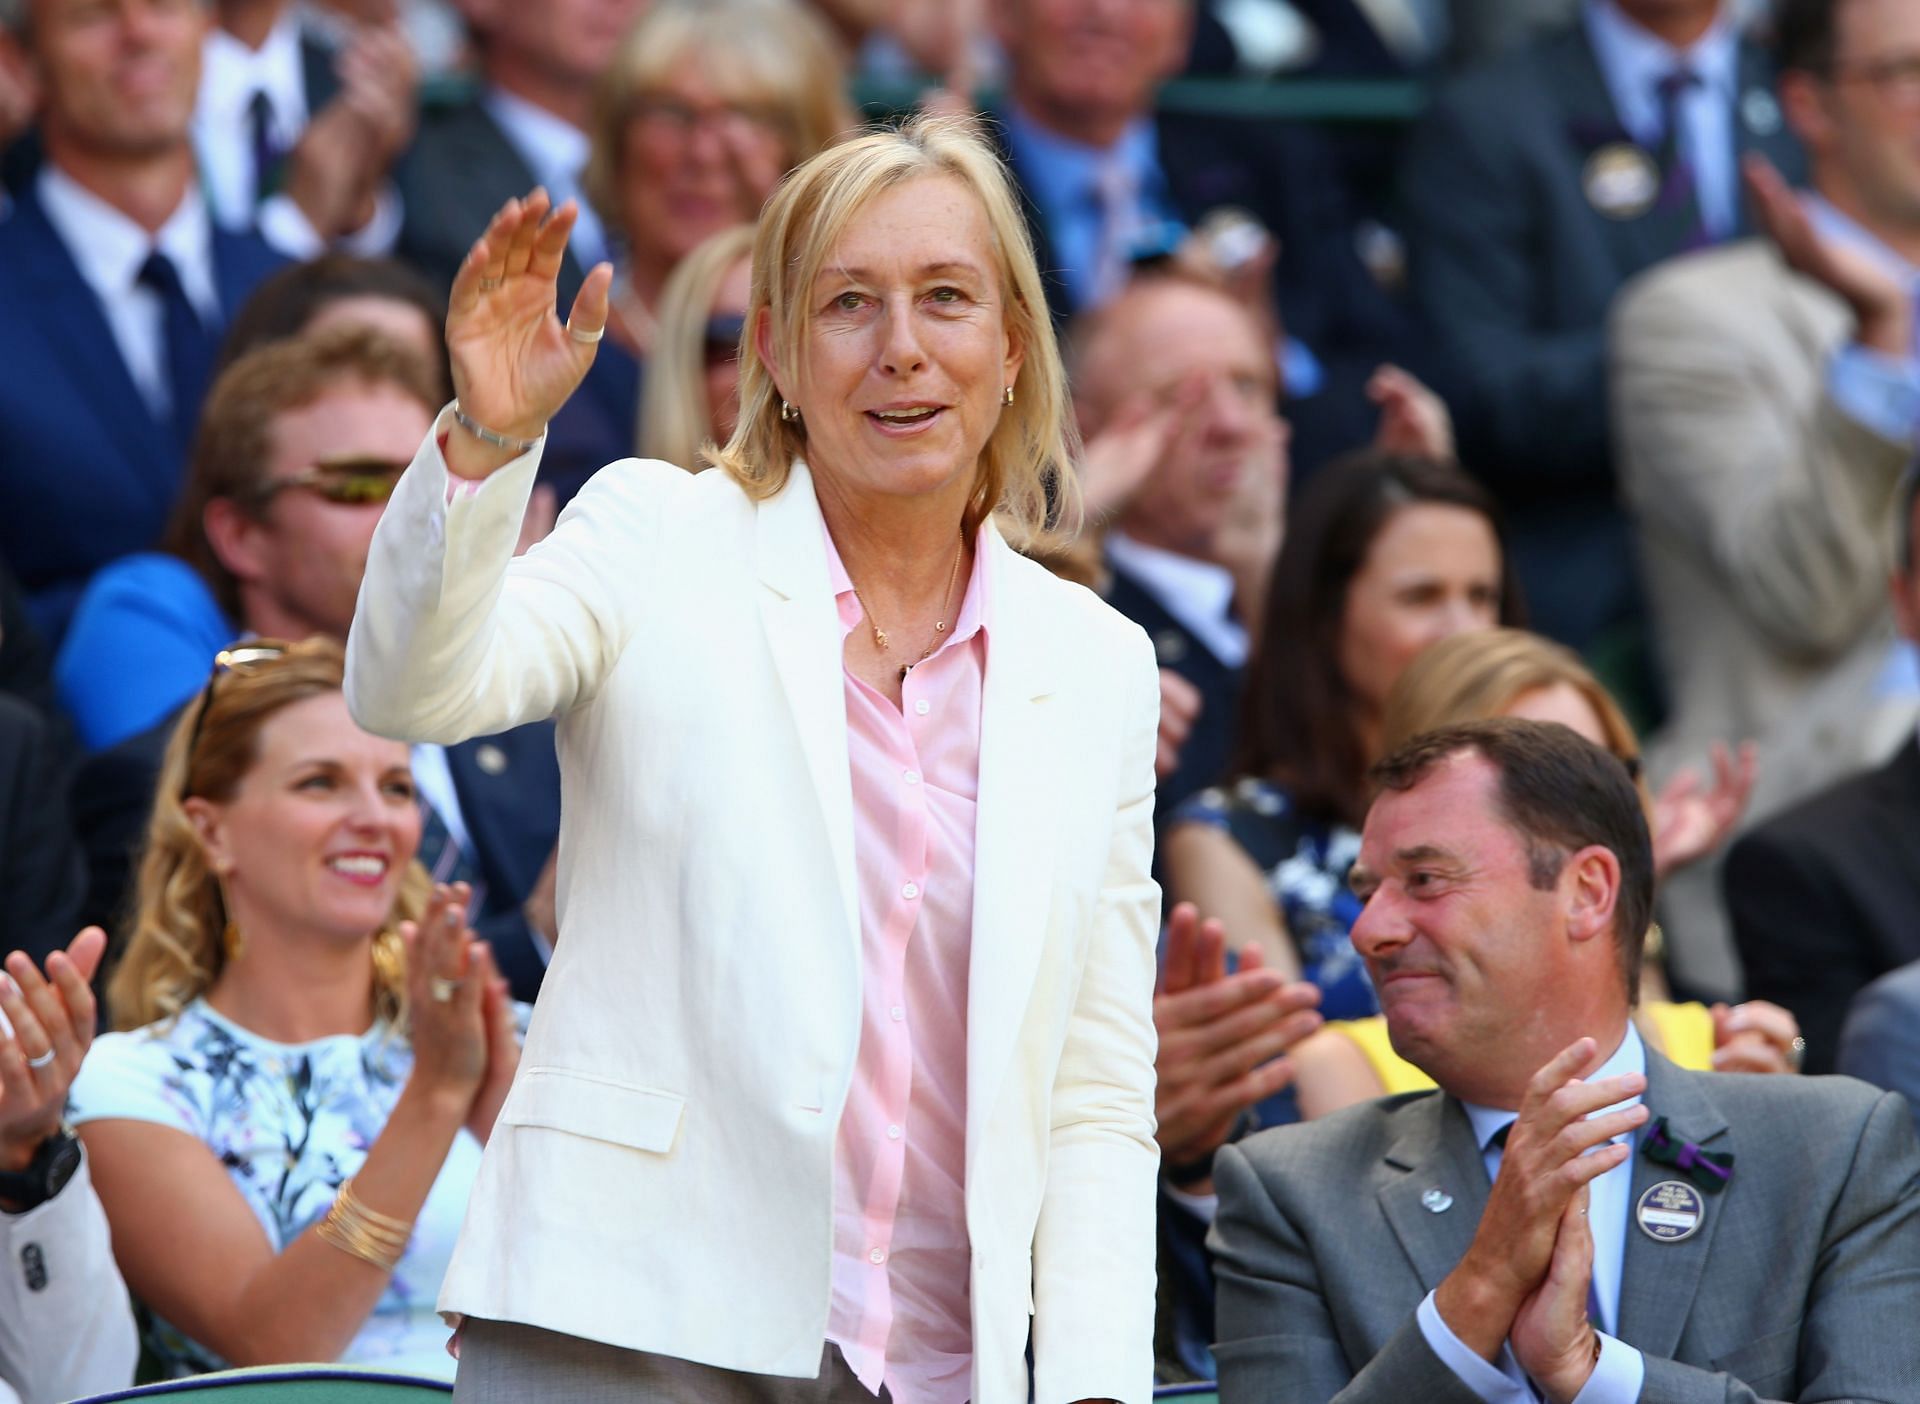 Martina Navratilova was of the opinion that there needed to be a separate catefory for biological females